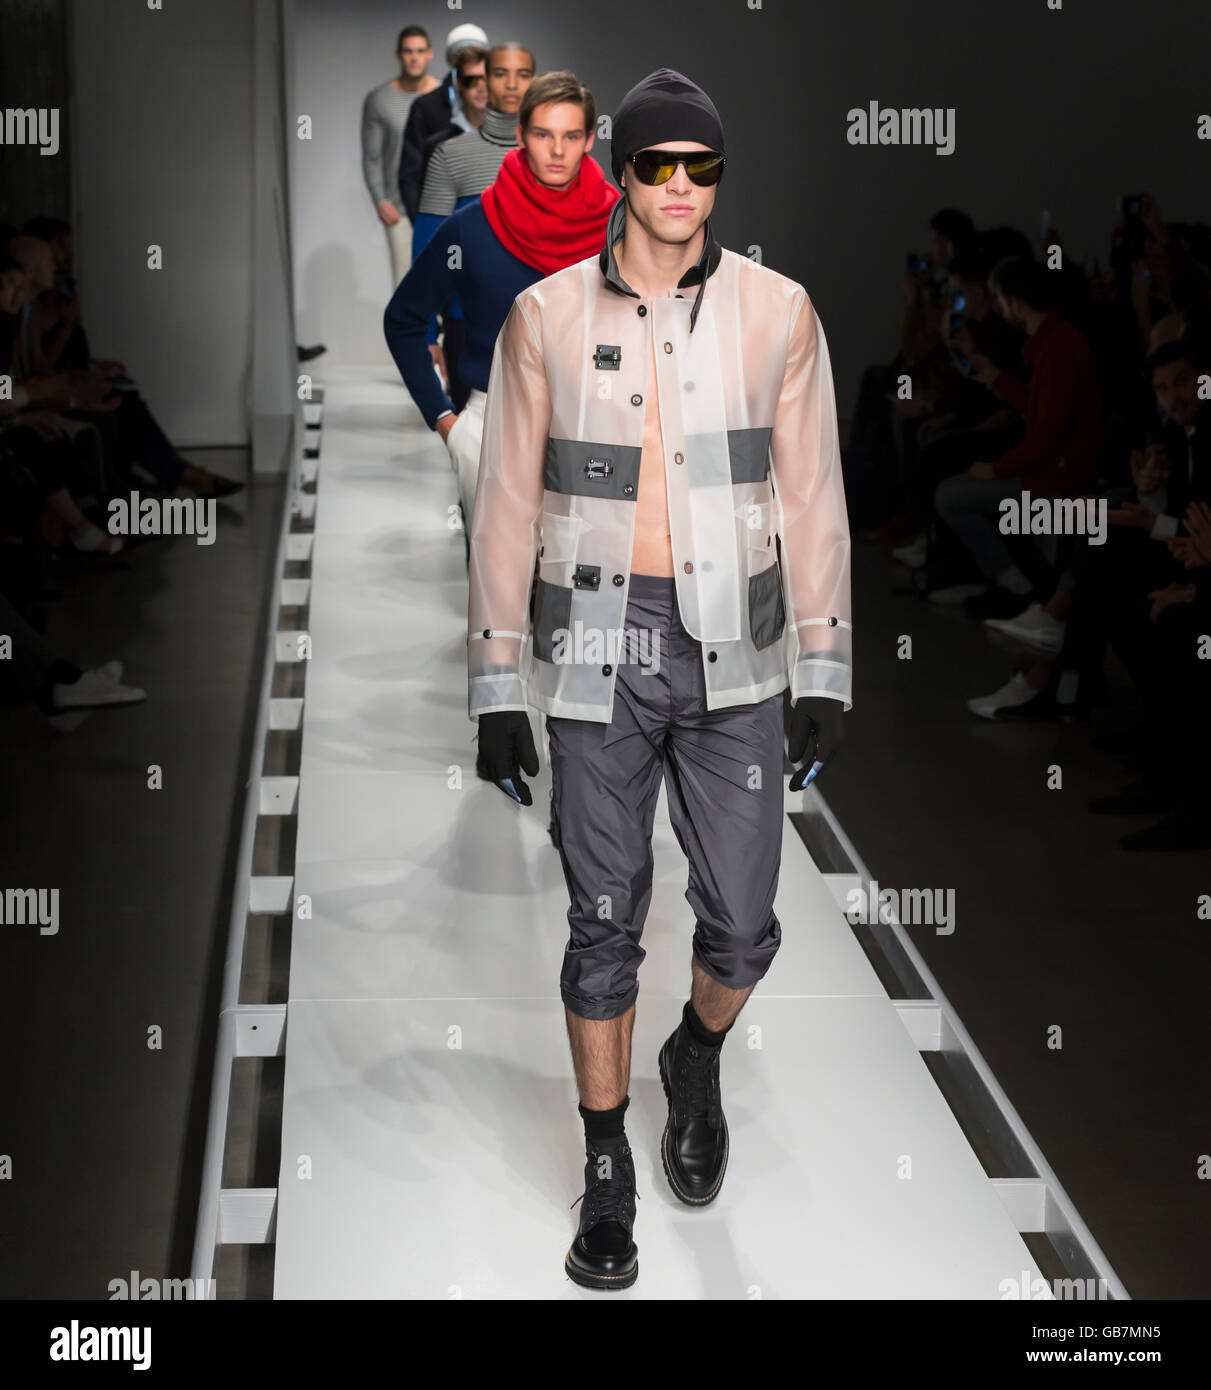 Nautica to introduce new brand direction at NYFW: Men's